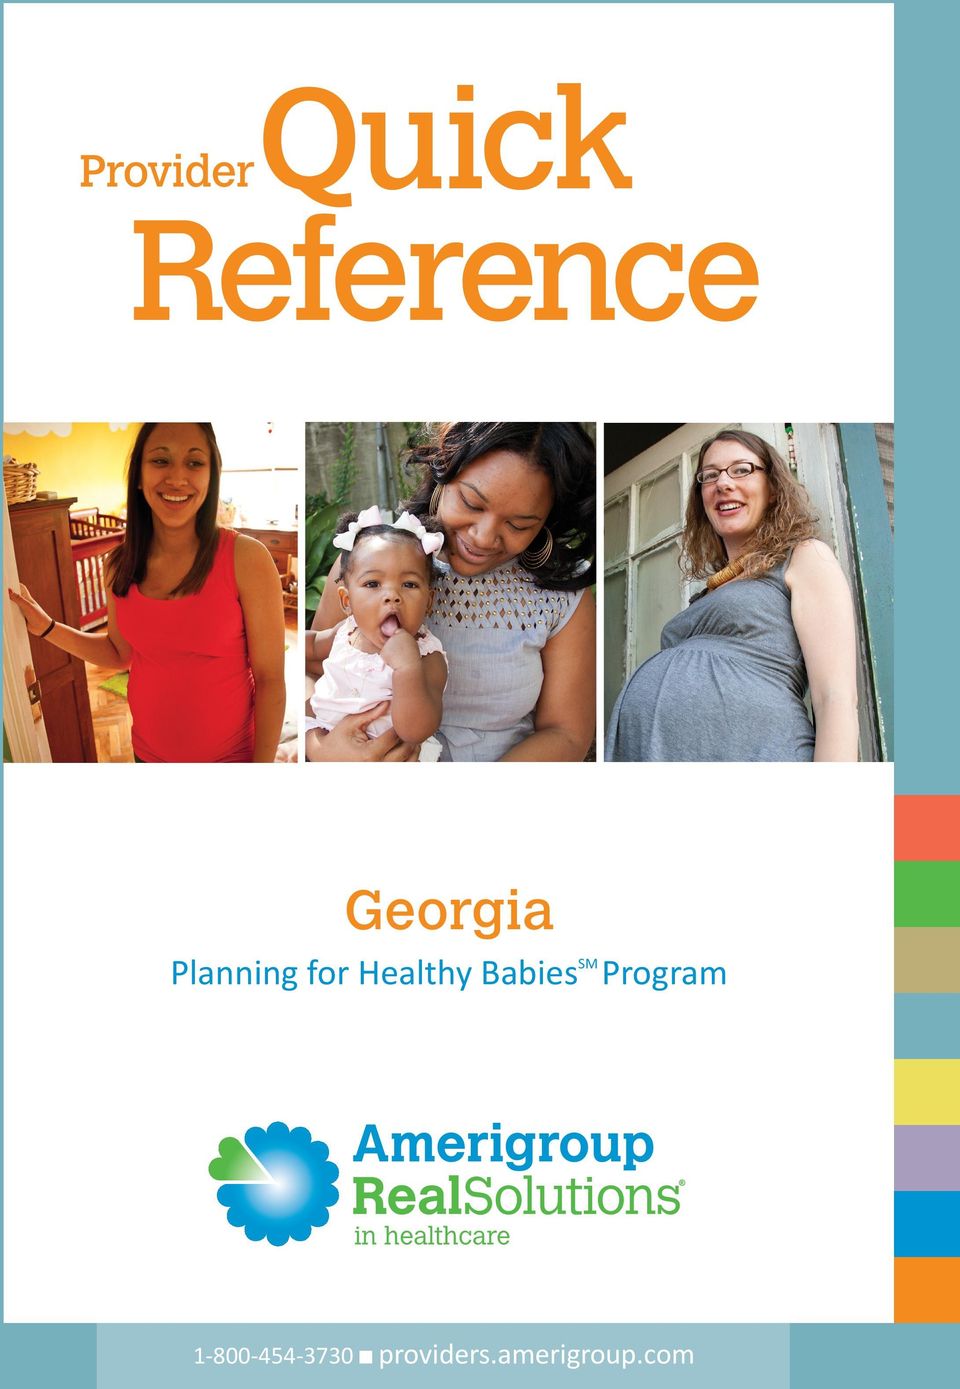 Amerigroup georgia planning for healthy babies insurance multicare conduent